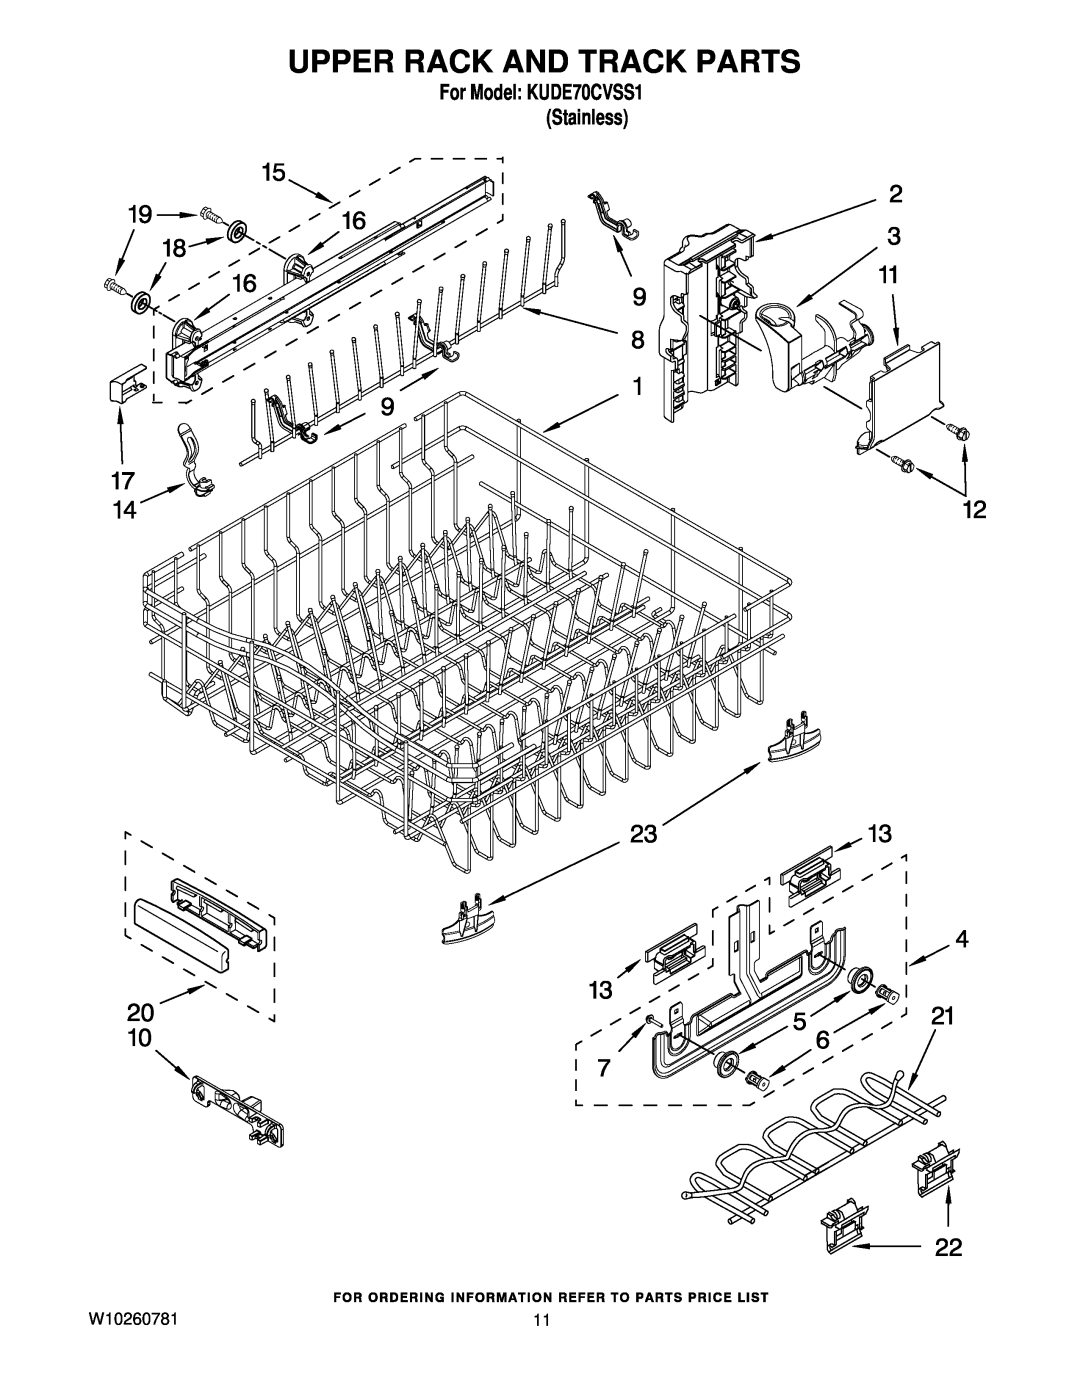 KitchenAid manual Upper Rack And Track Parts, W10260781, For Model KUDE70CVSS1 Stainless 